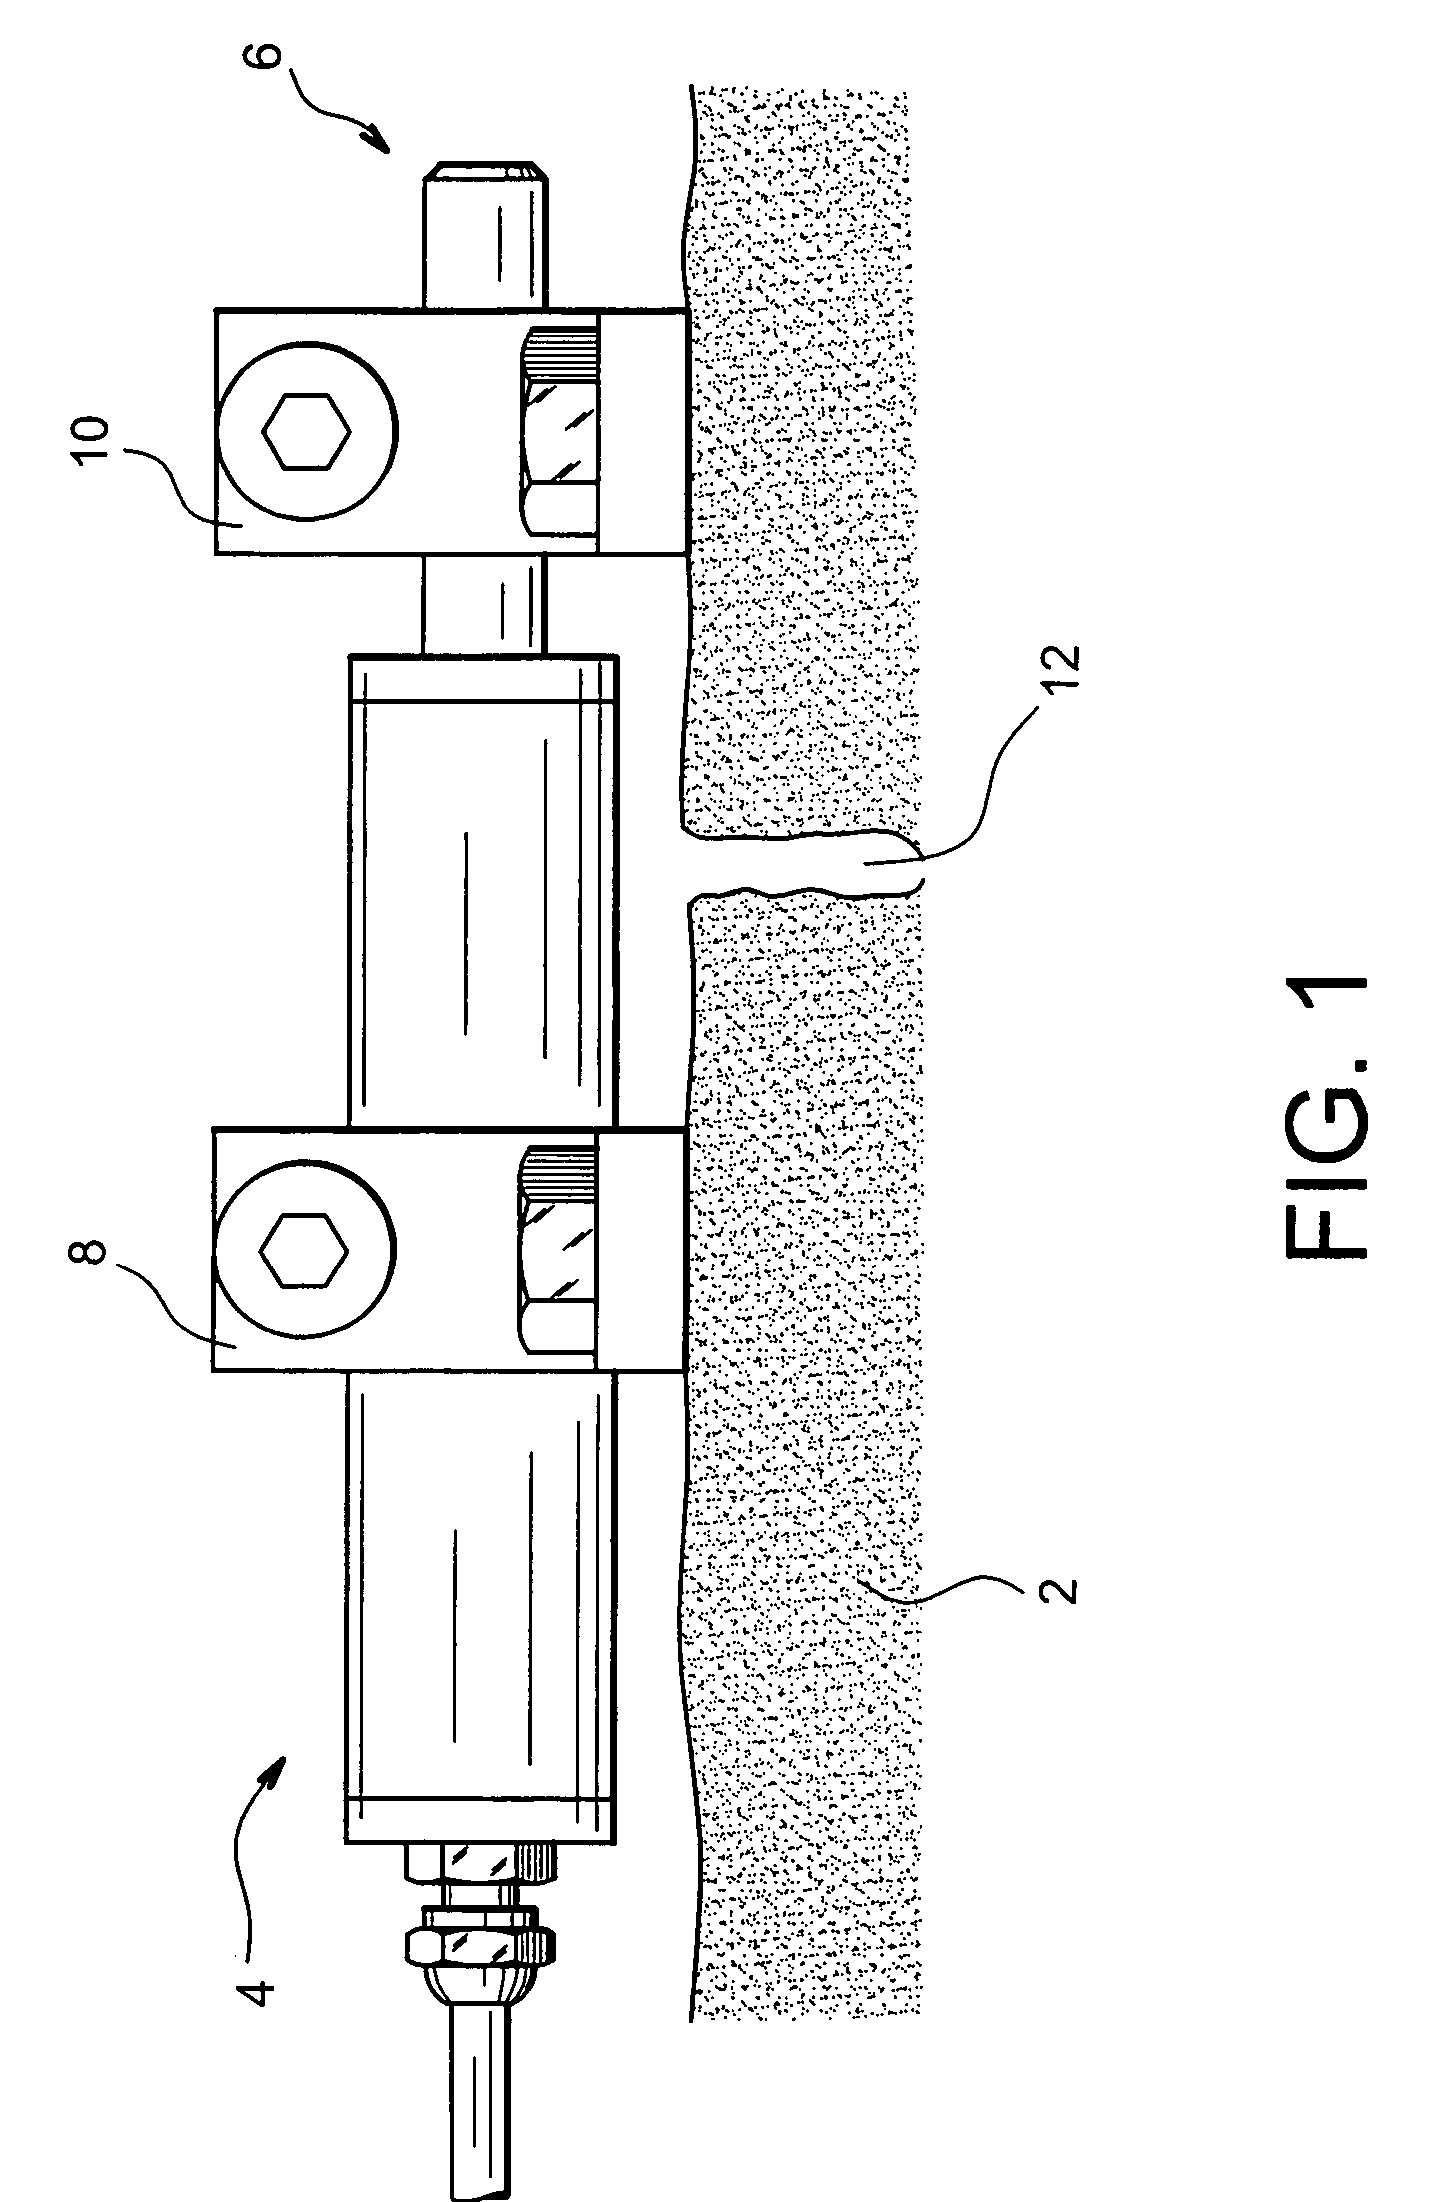 Extensometer comprising a flexible sensing element and Bragg gratings